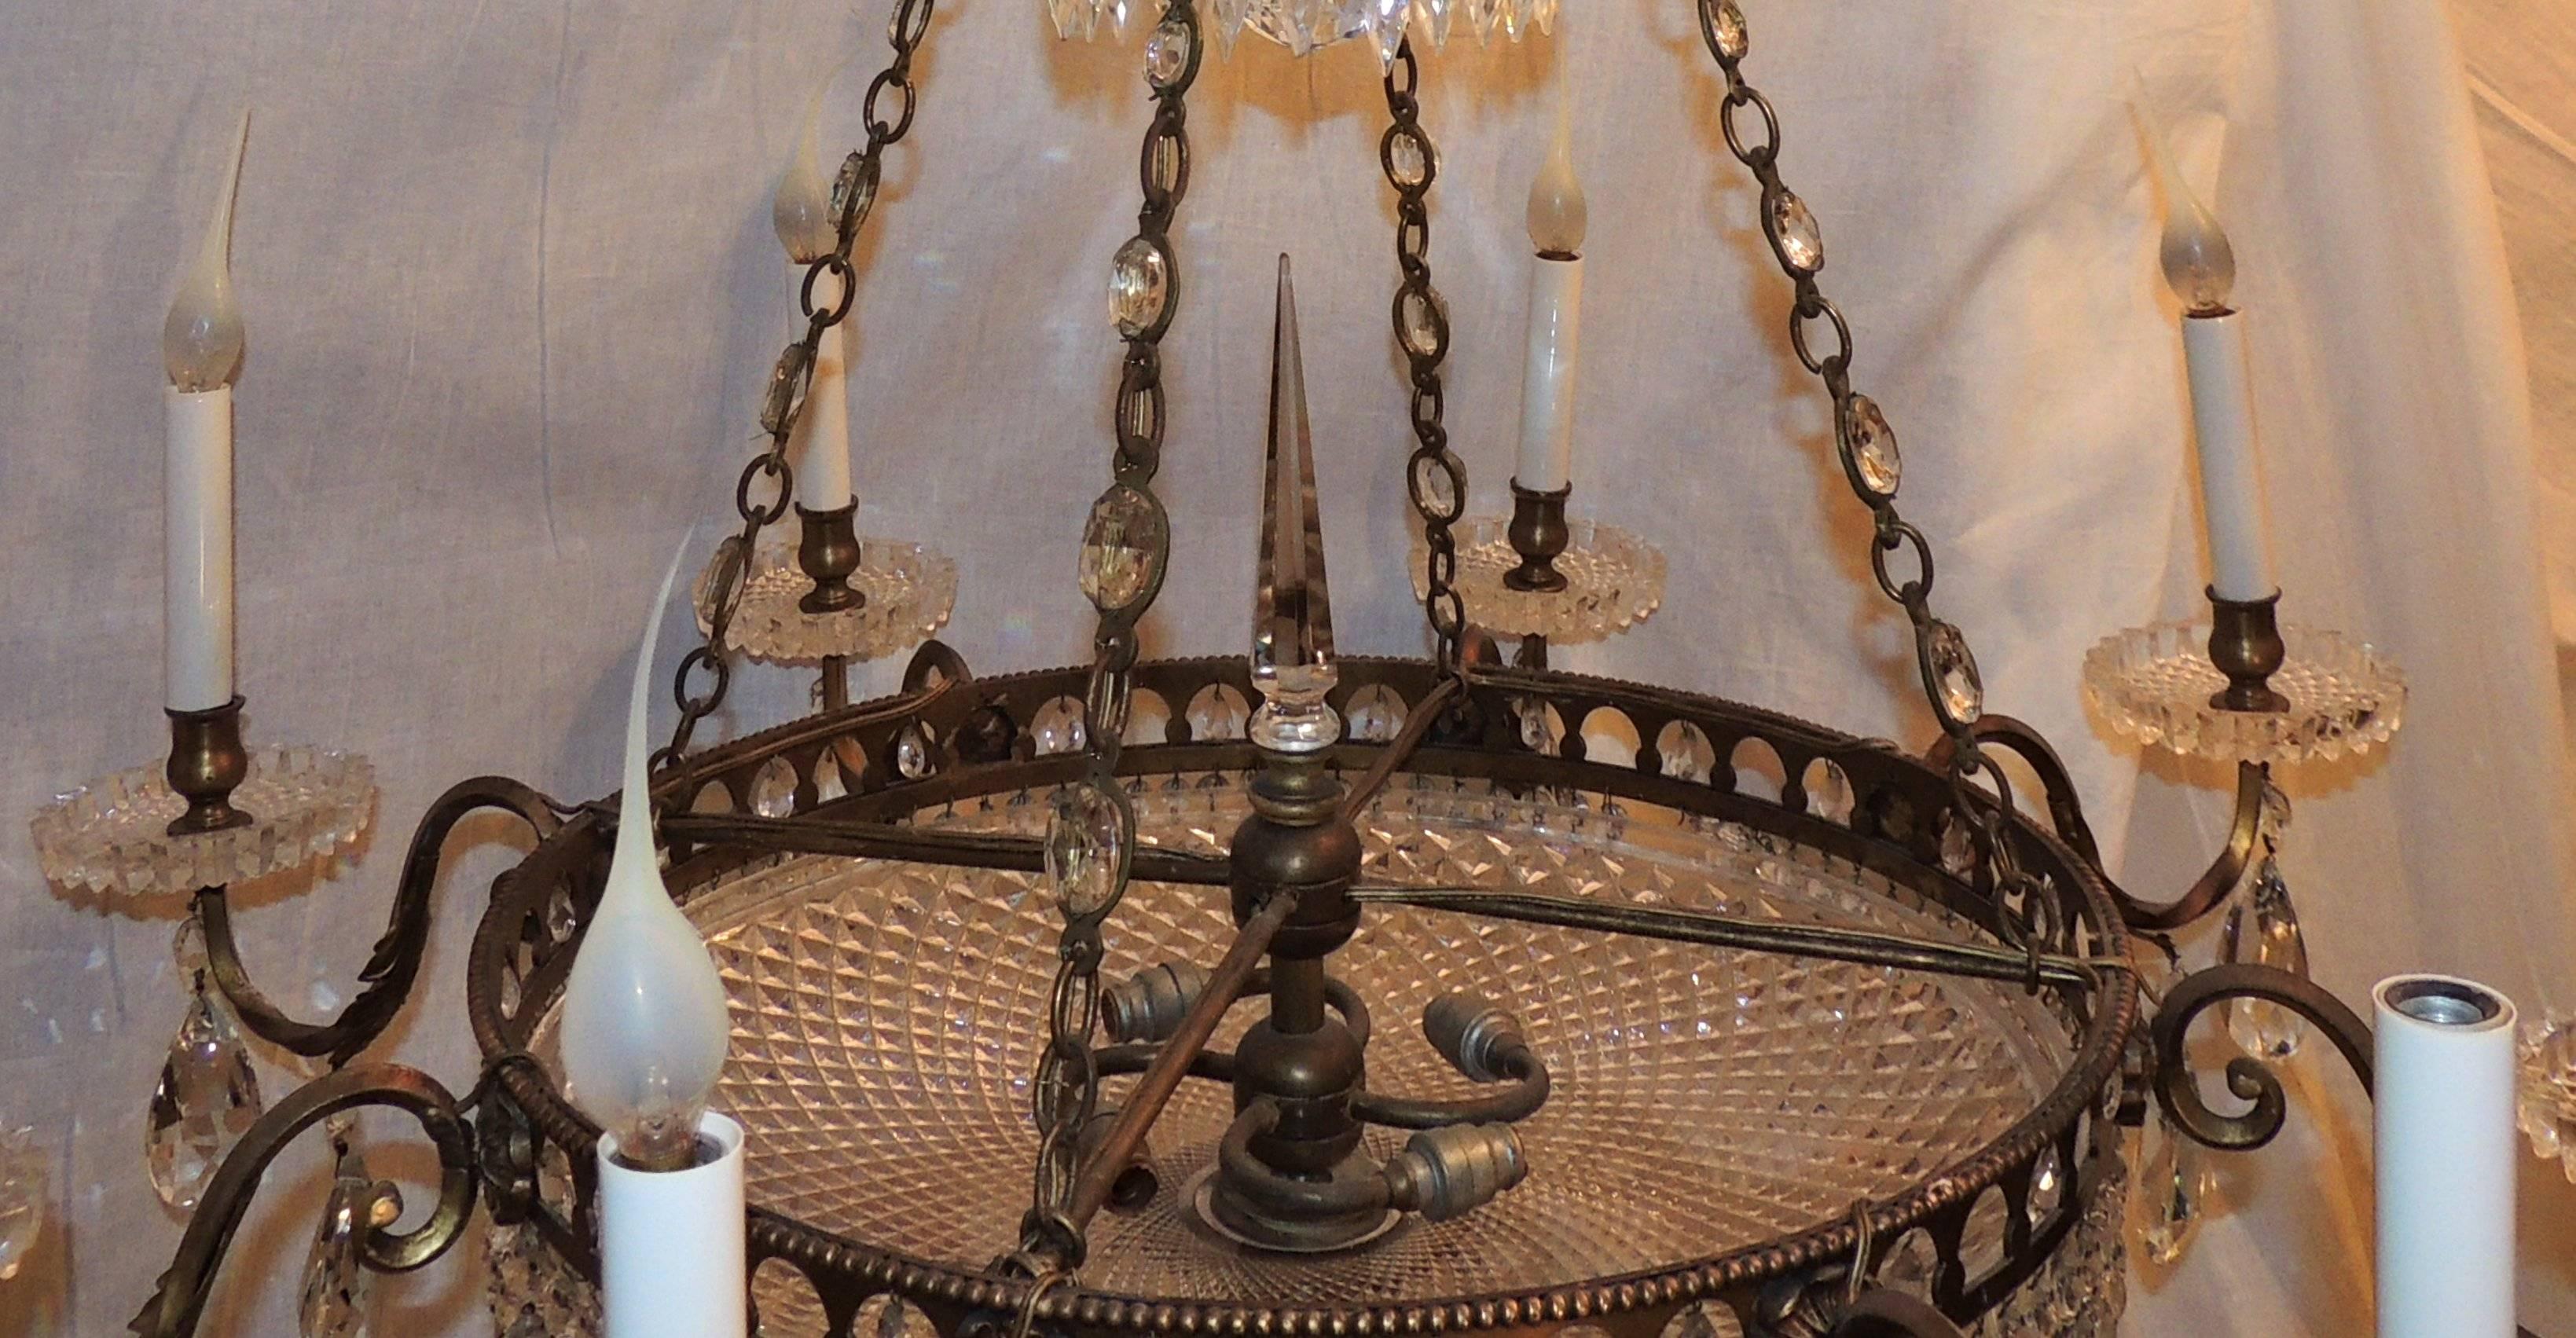 Wonderful French Bronze Regency Empire Crystal 12-Light Neoclassical Chandelier In Good Condition For Sale In Roslyn, NY